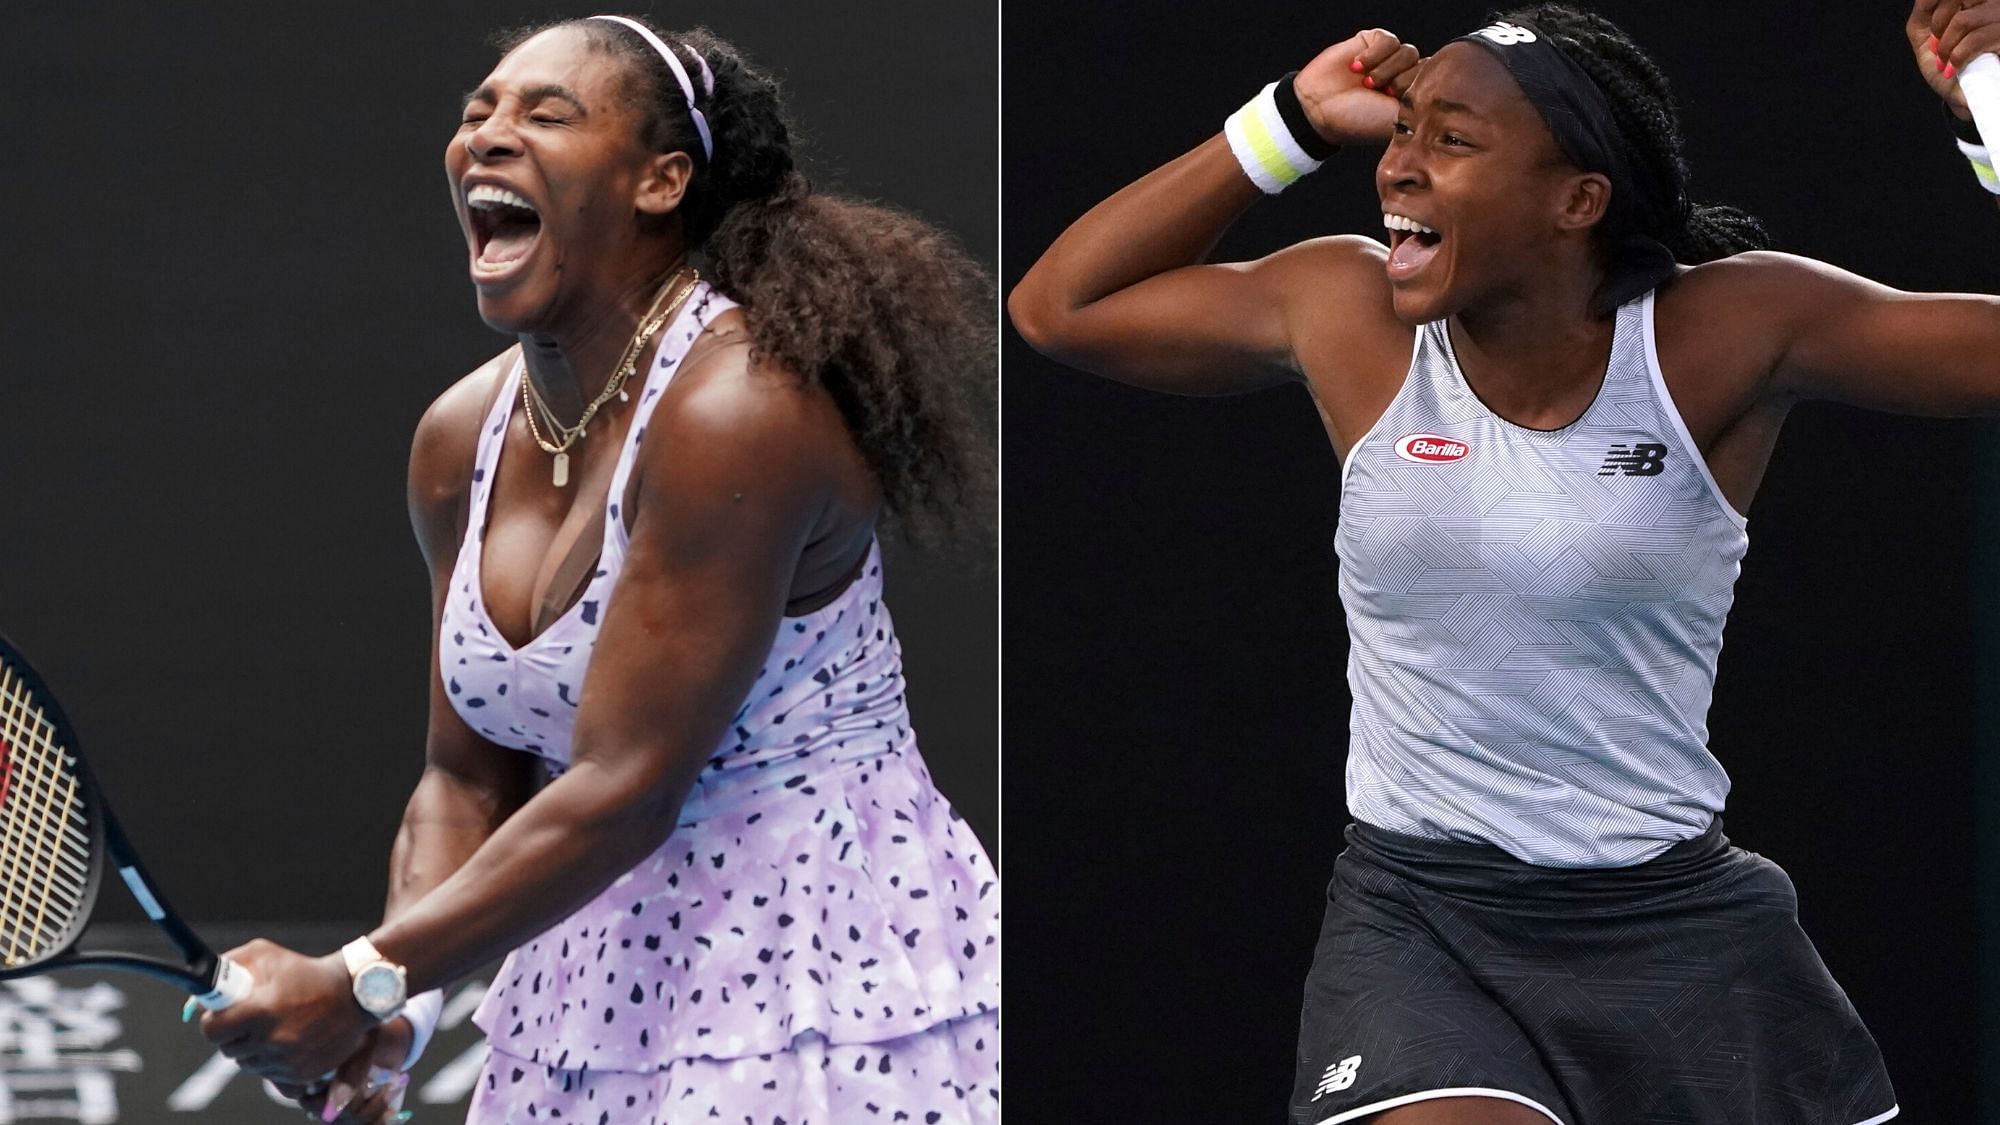 Serena Williams suffered her earliest exit from the Australian Open since 2006 but the 23-time Grand Slam champion is not ready to hand over the baton to heir apparent Coco Gauff just yet.